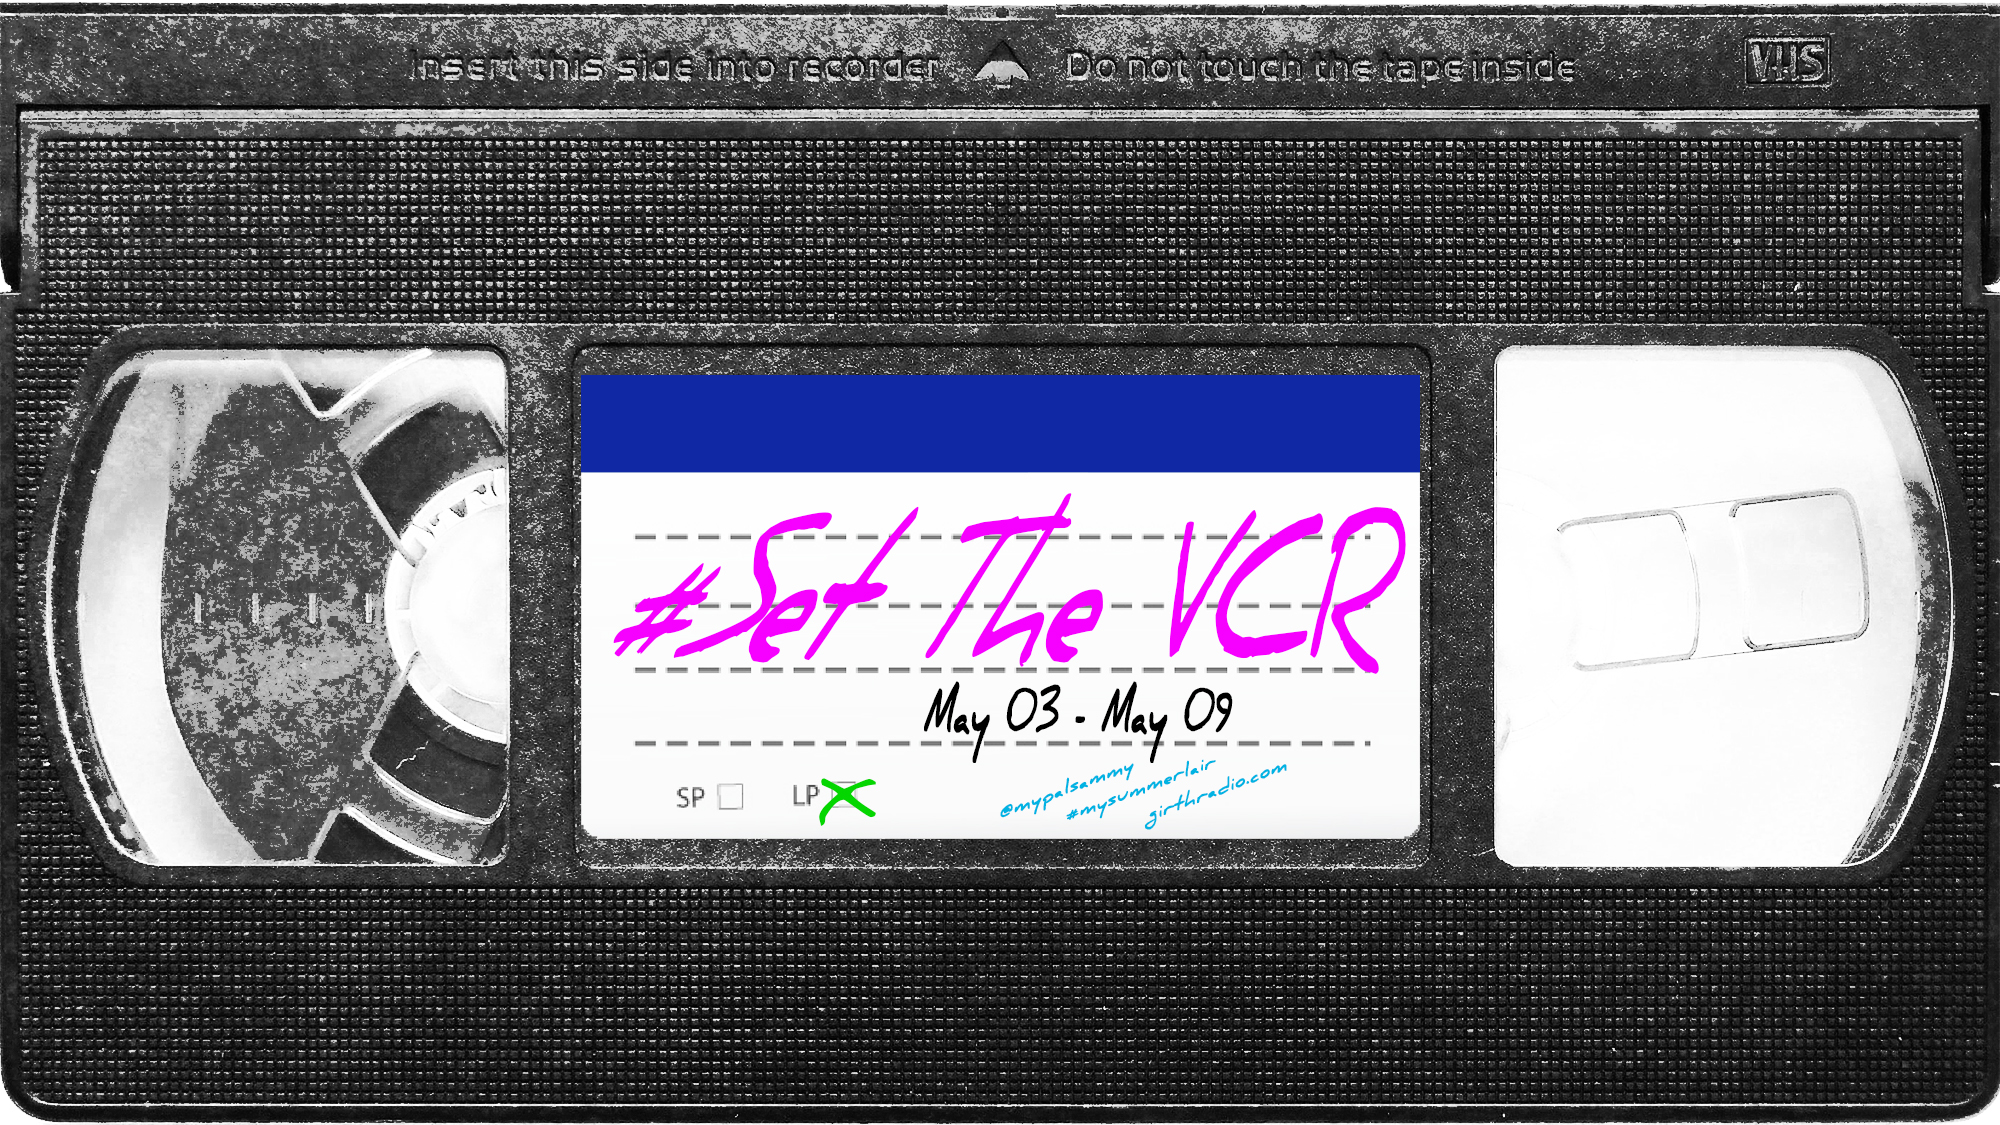 #SetTheVCR: May 3-9, 2020